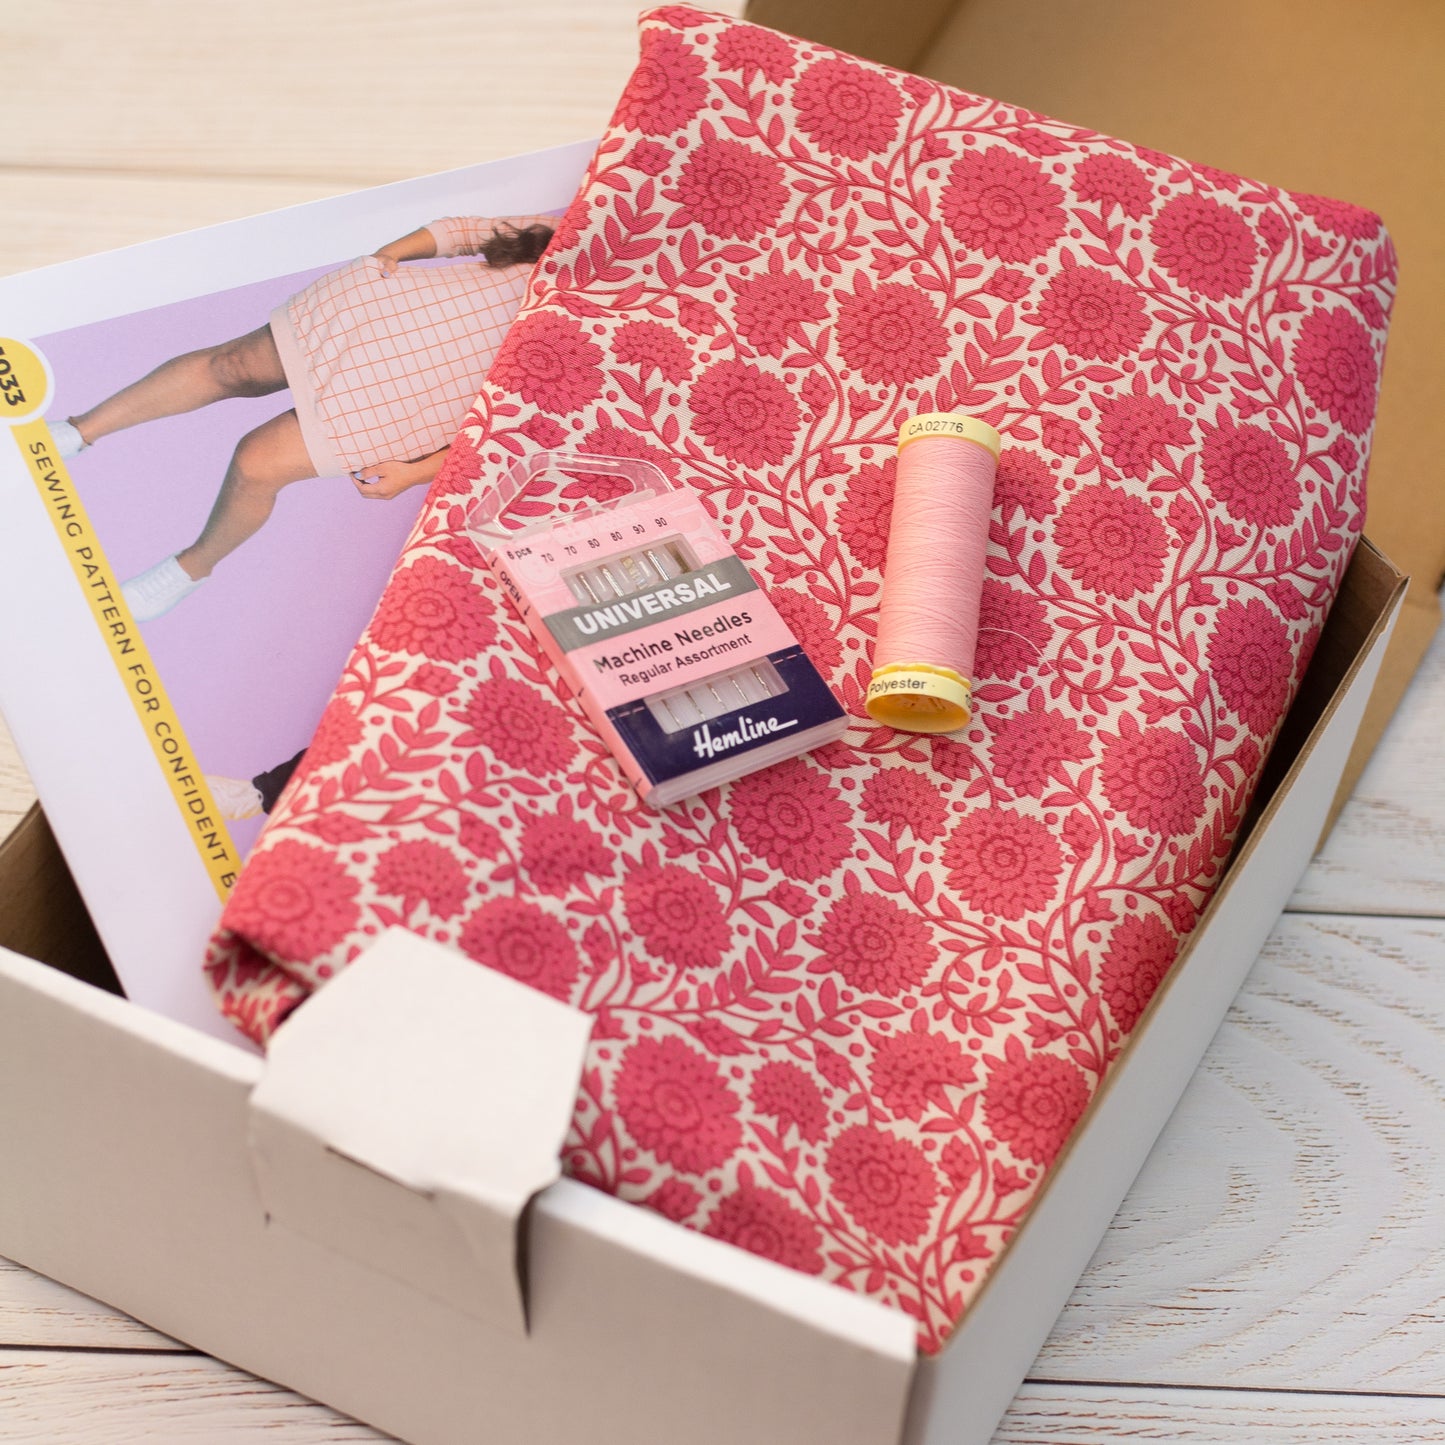 Makerly Dressmakers Subscription Box